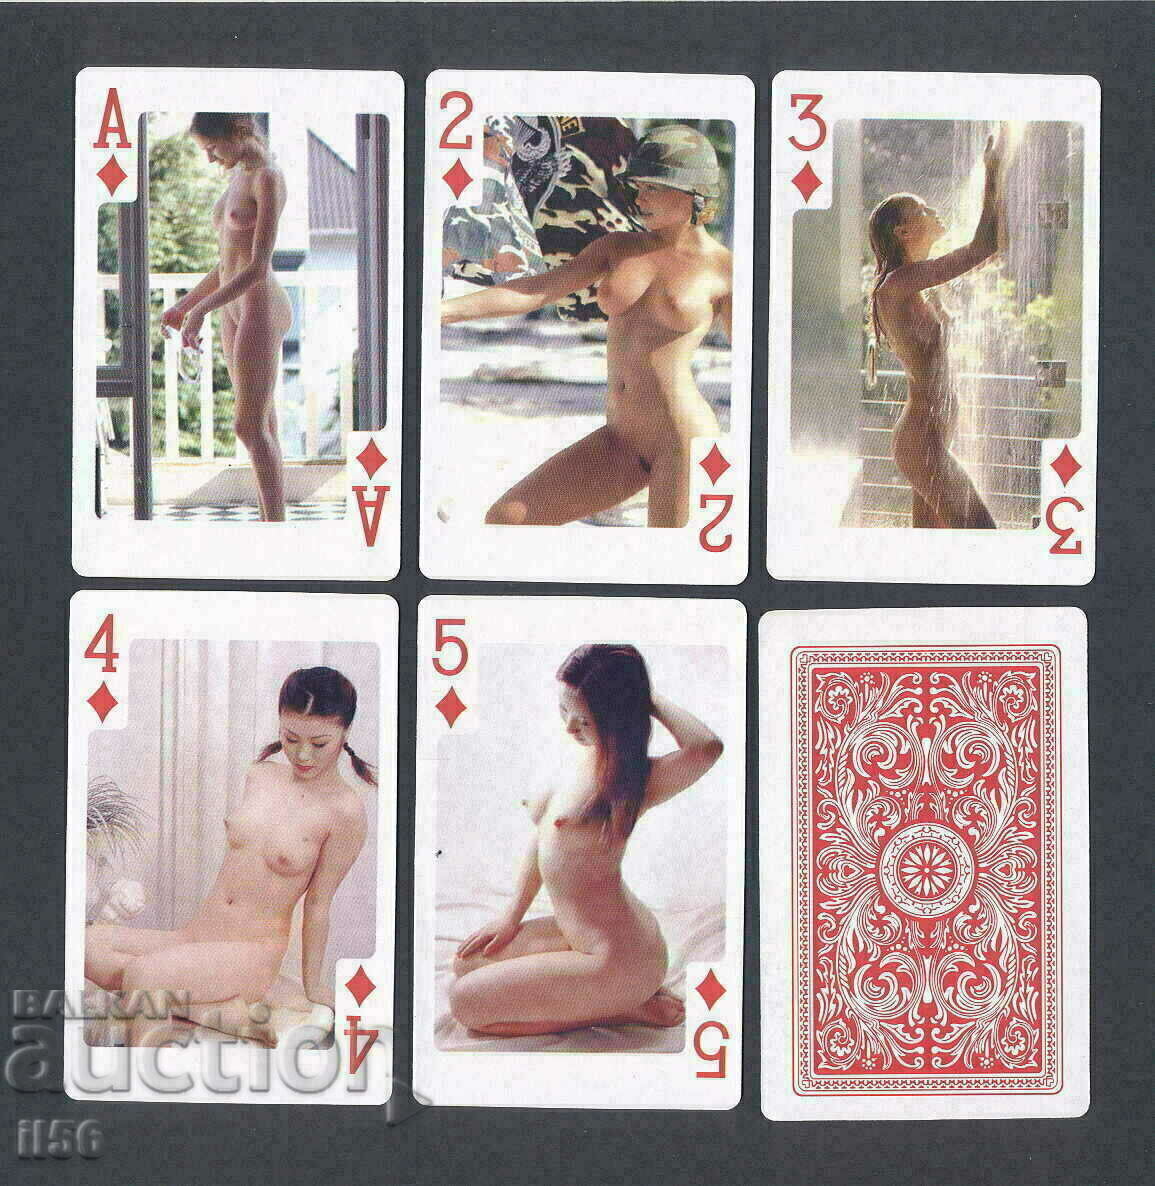 Playing cards - erotica - poker - straight (flush) - checkers